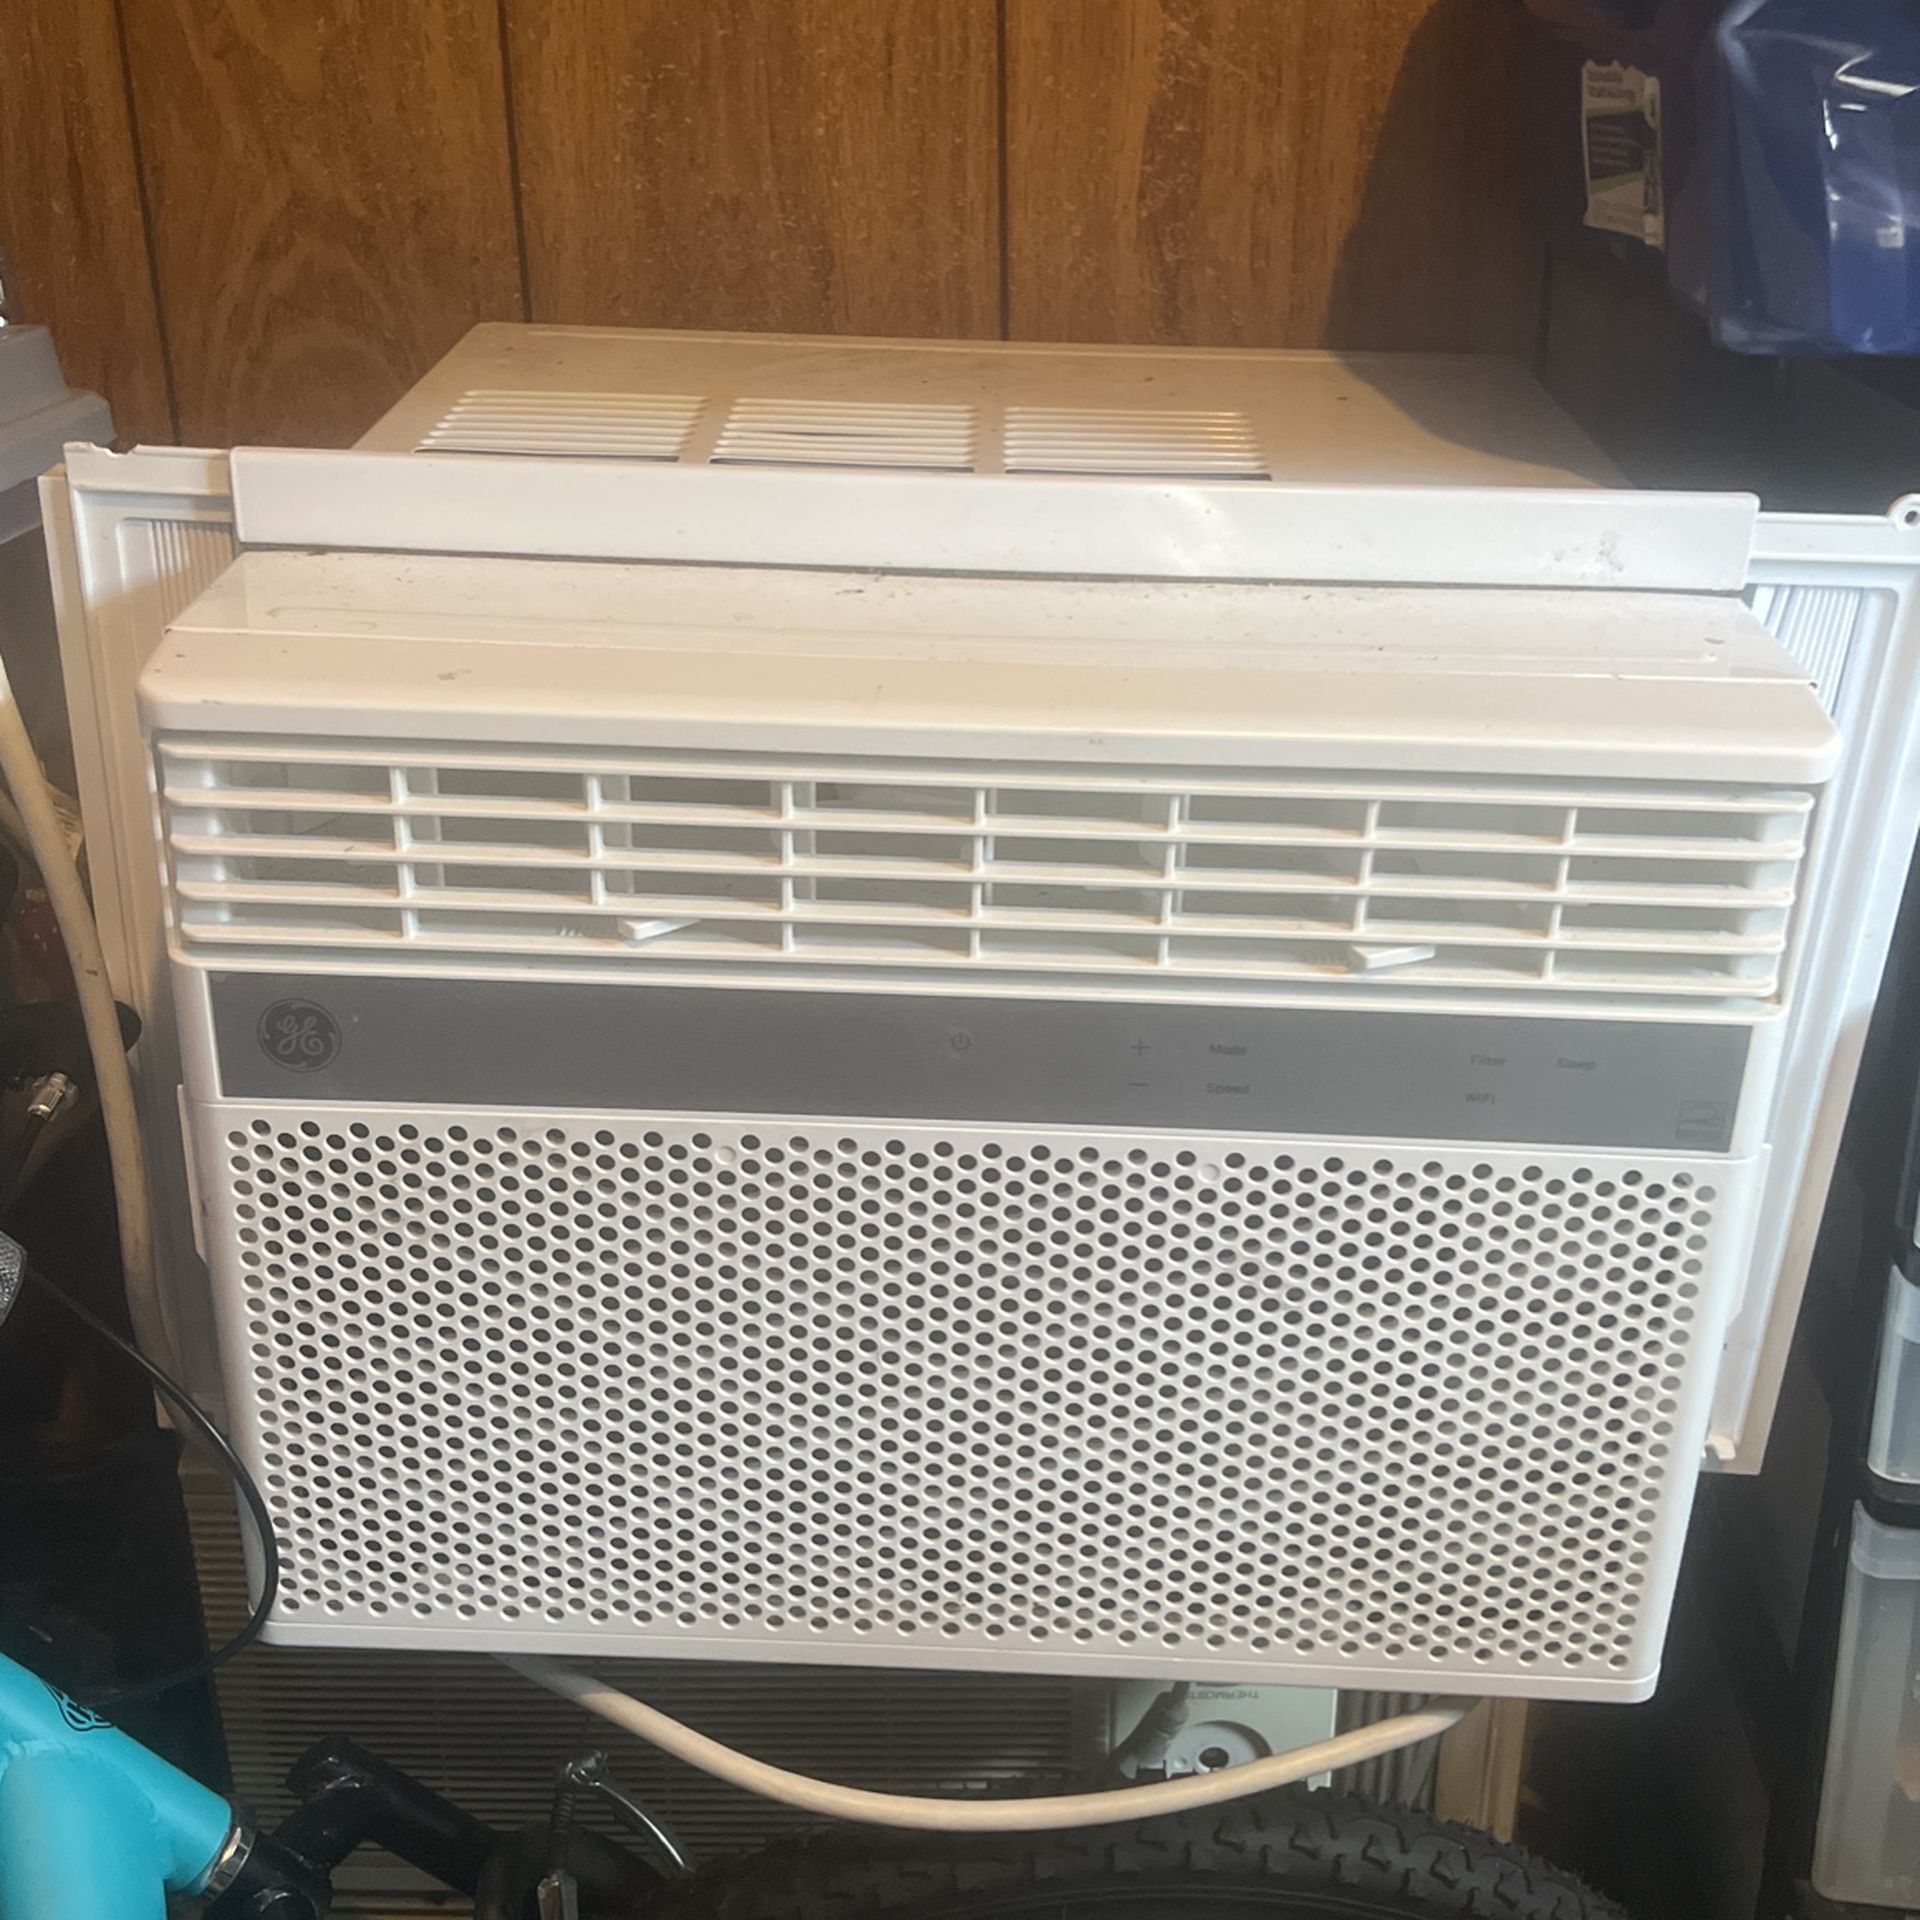 General Electric Air Conditioner 